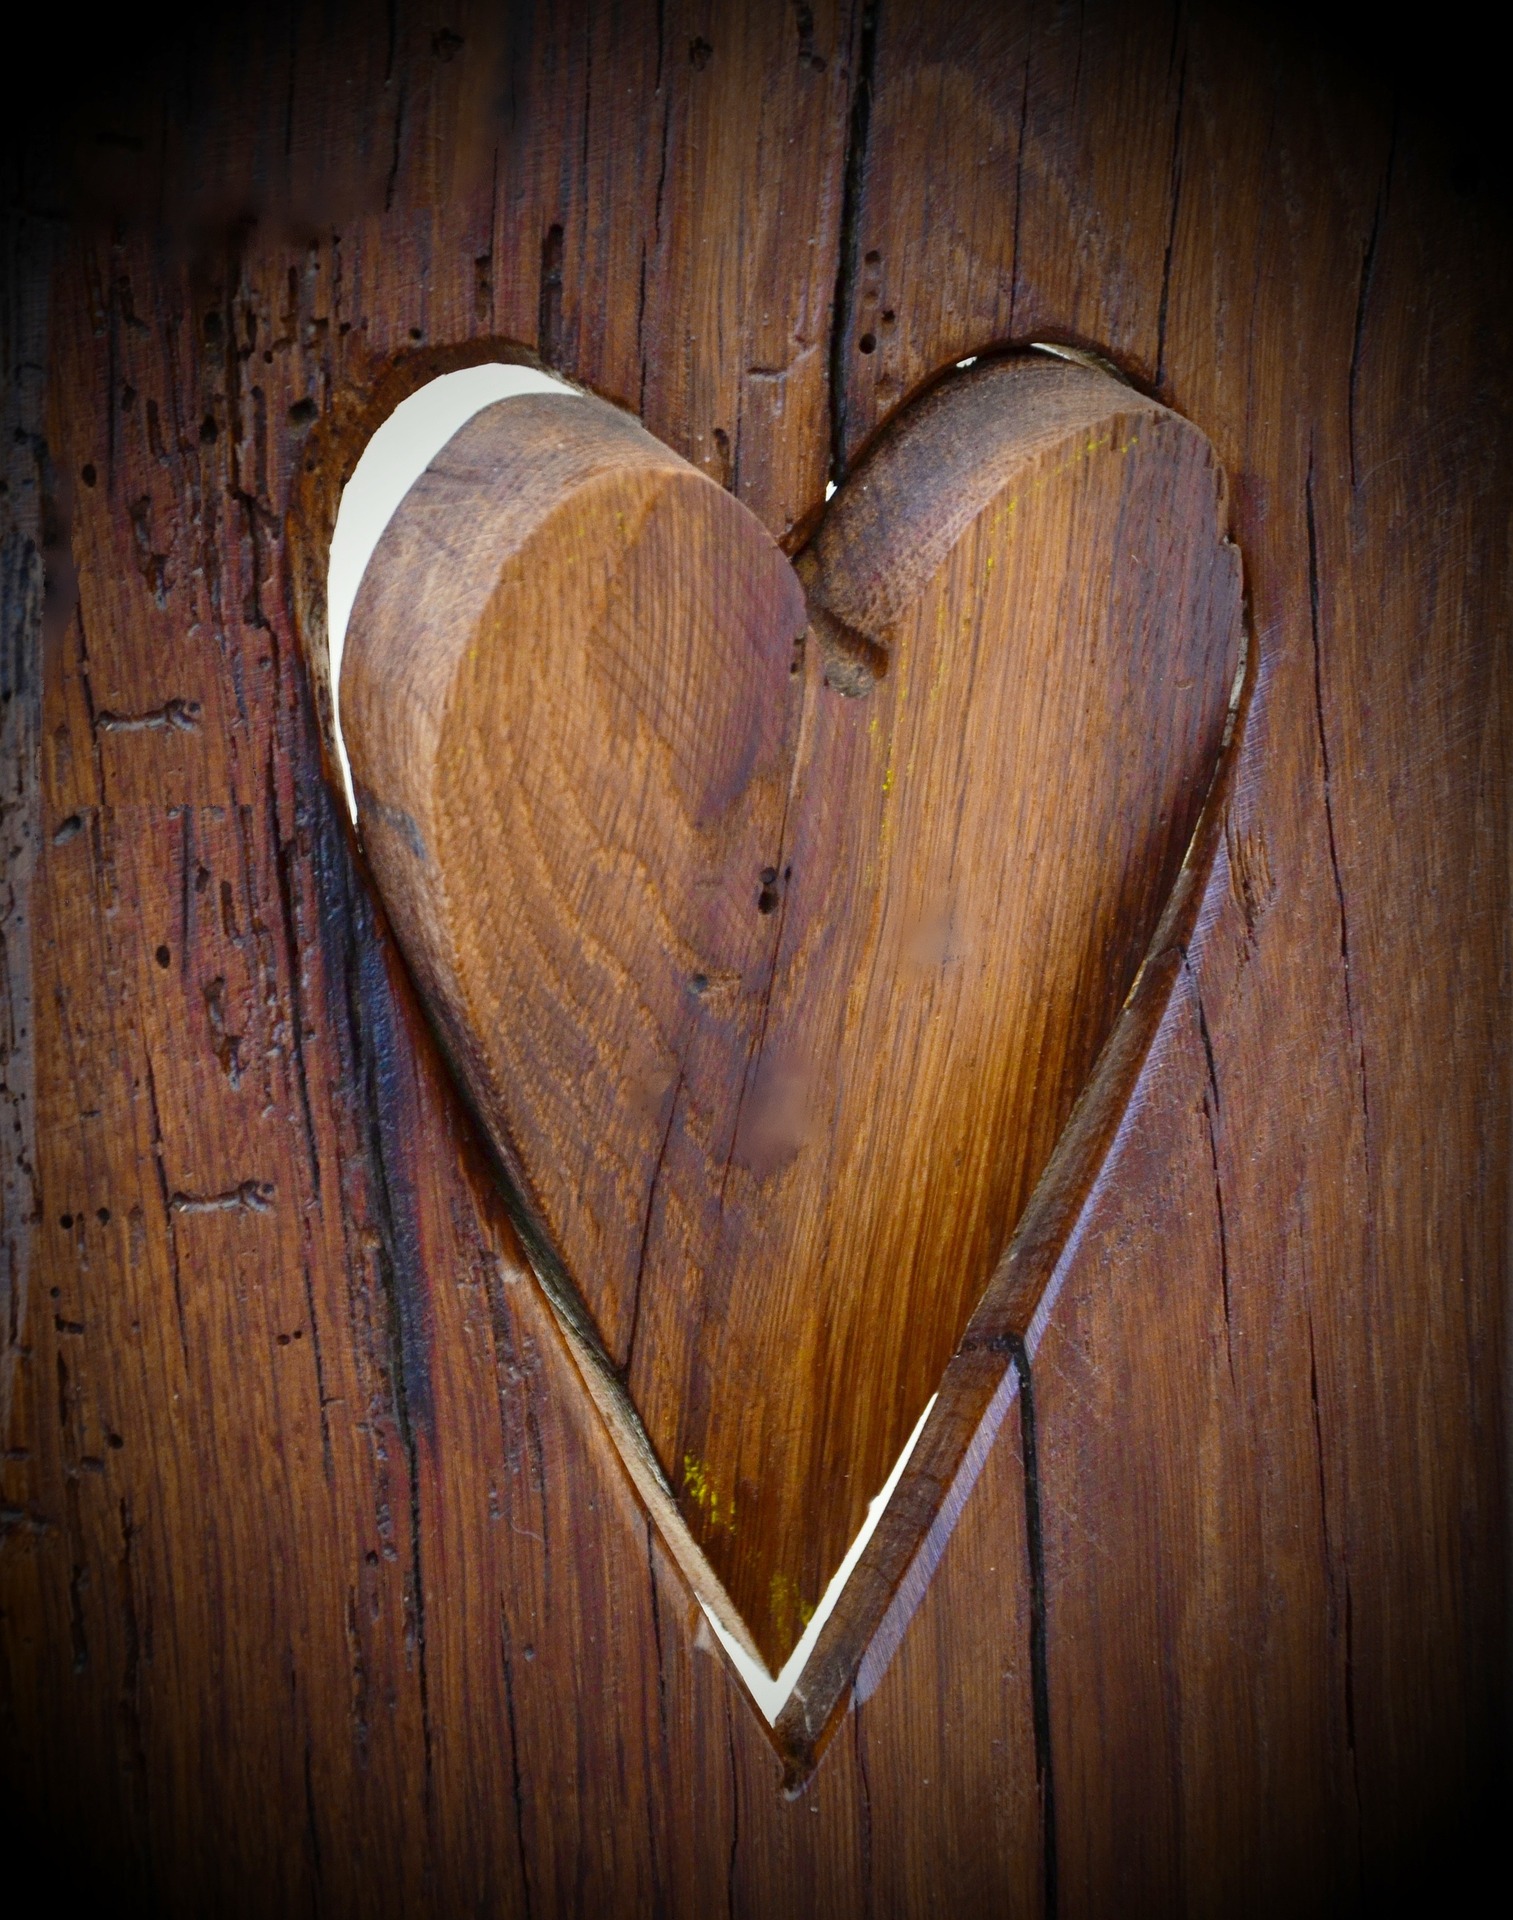 Can we carve love into the wood of our tree?